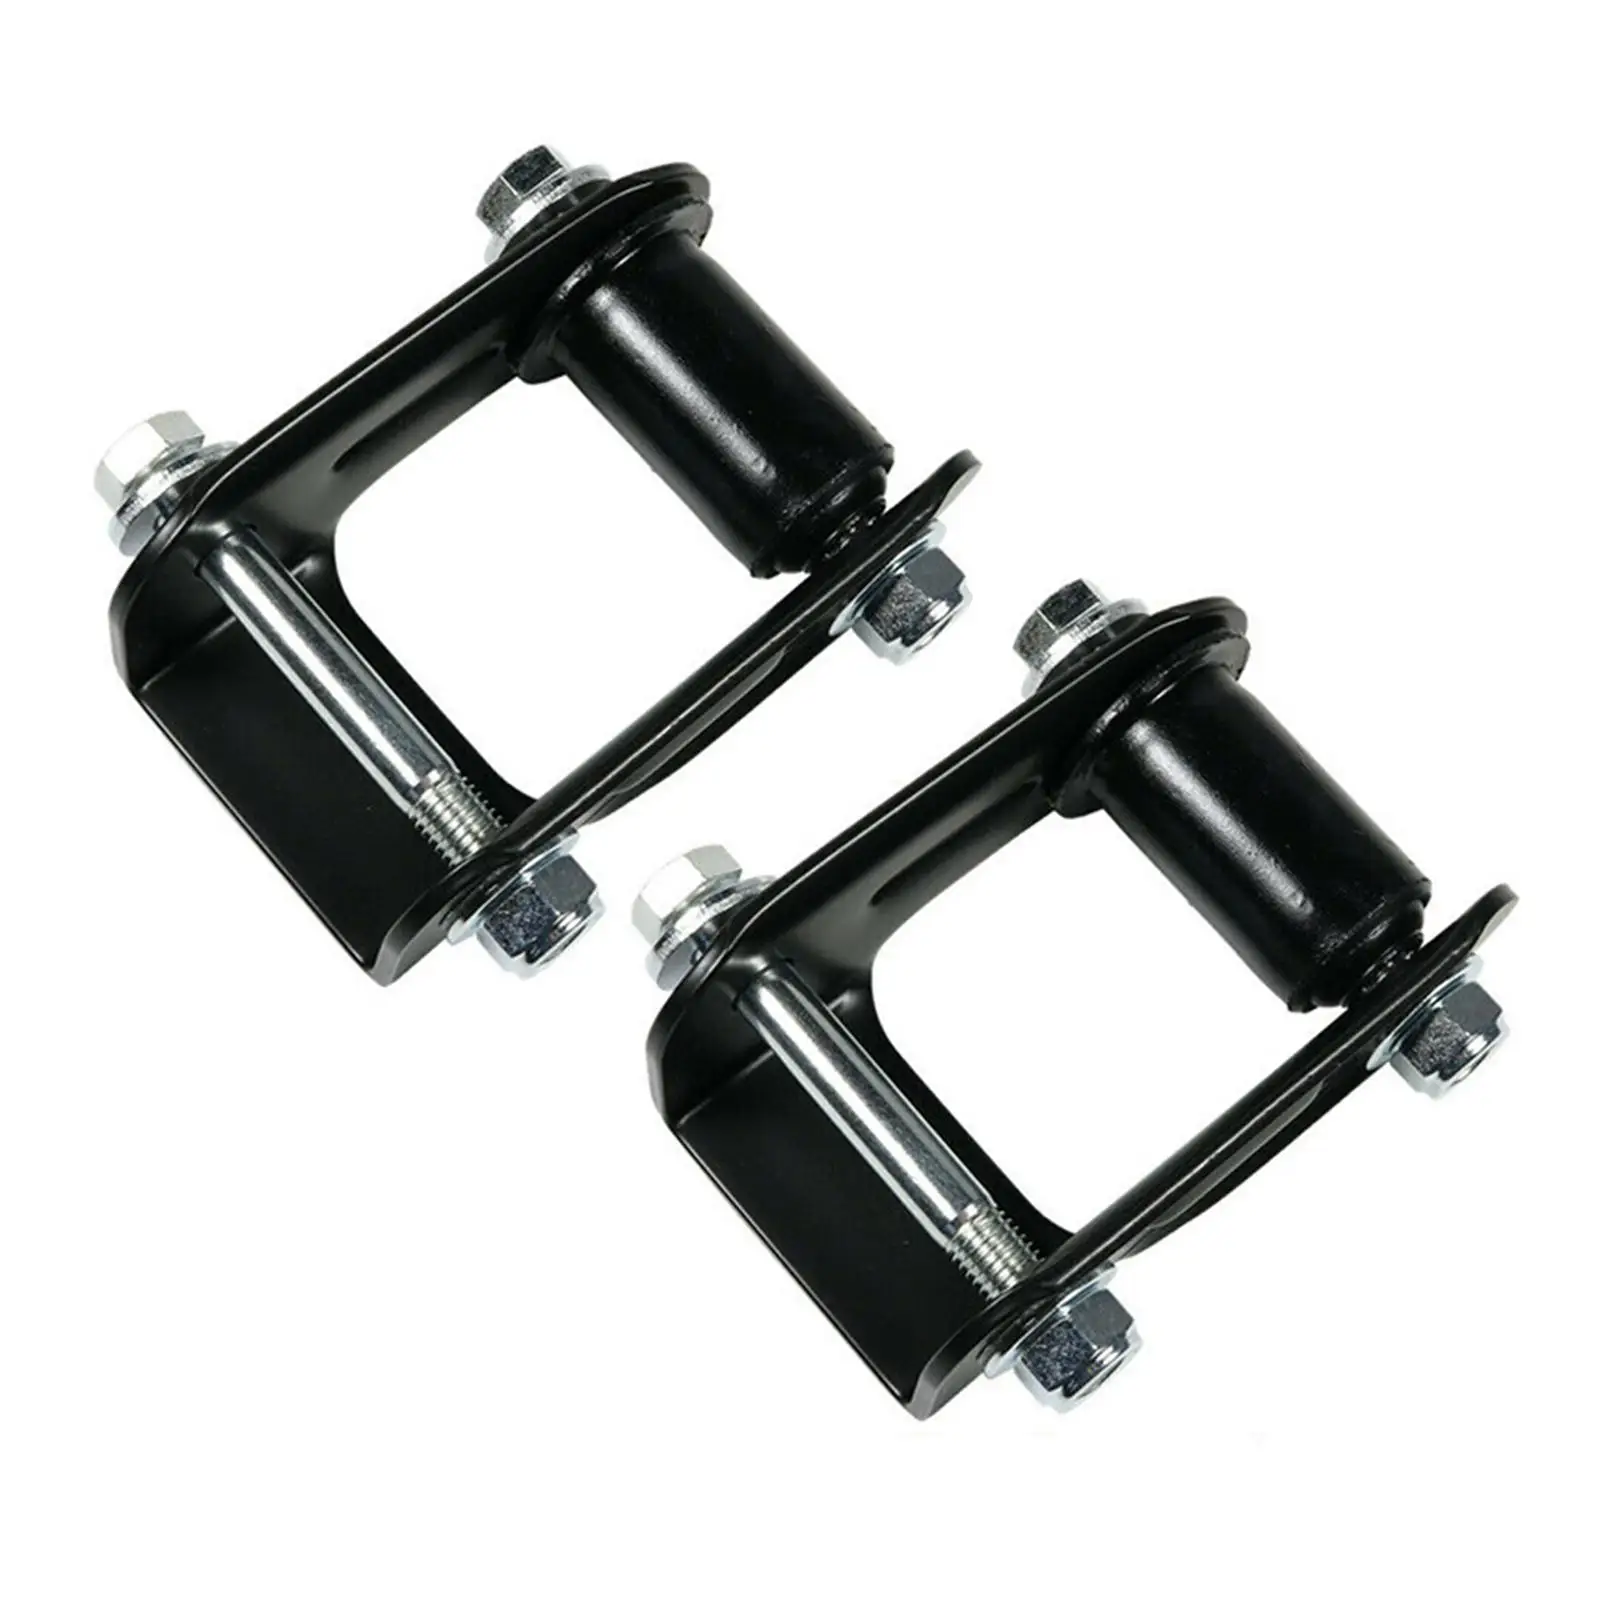 2Pcs Rear Leaf Spring Shackle Kit Exquisite Workmanship Easily Install Durable Decorative Accessories for Chevrolet Blazer